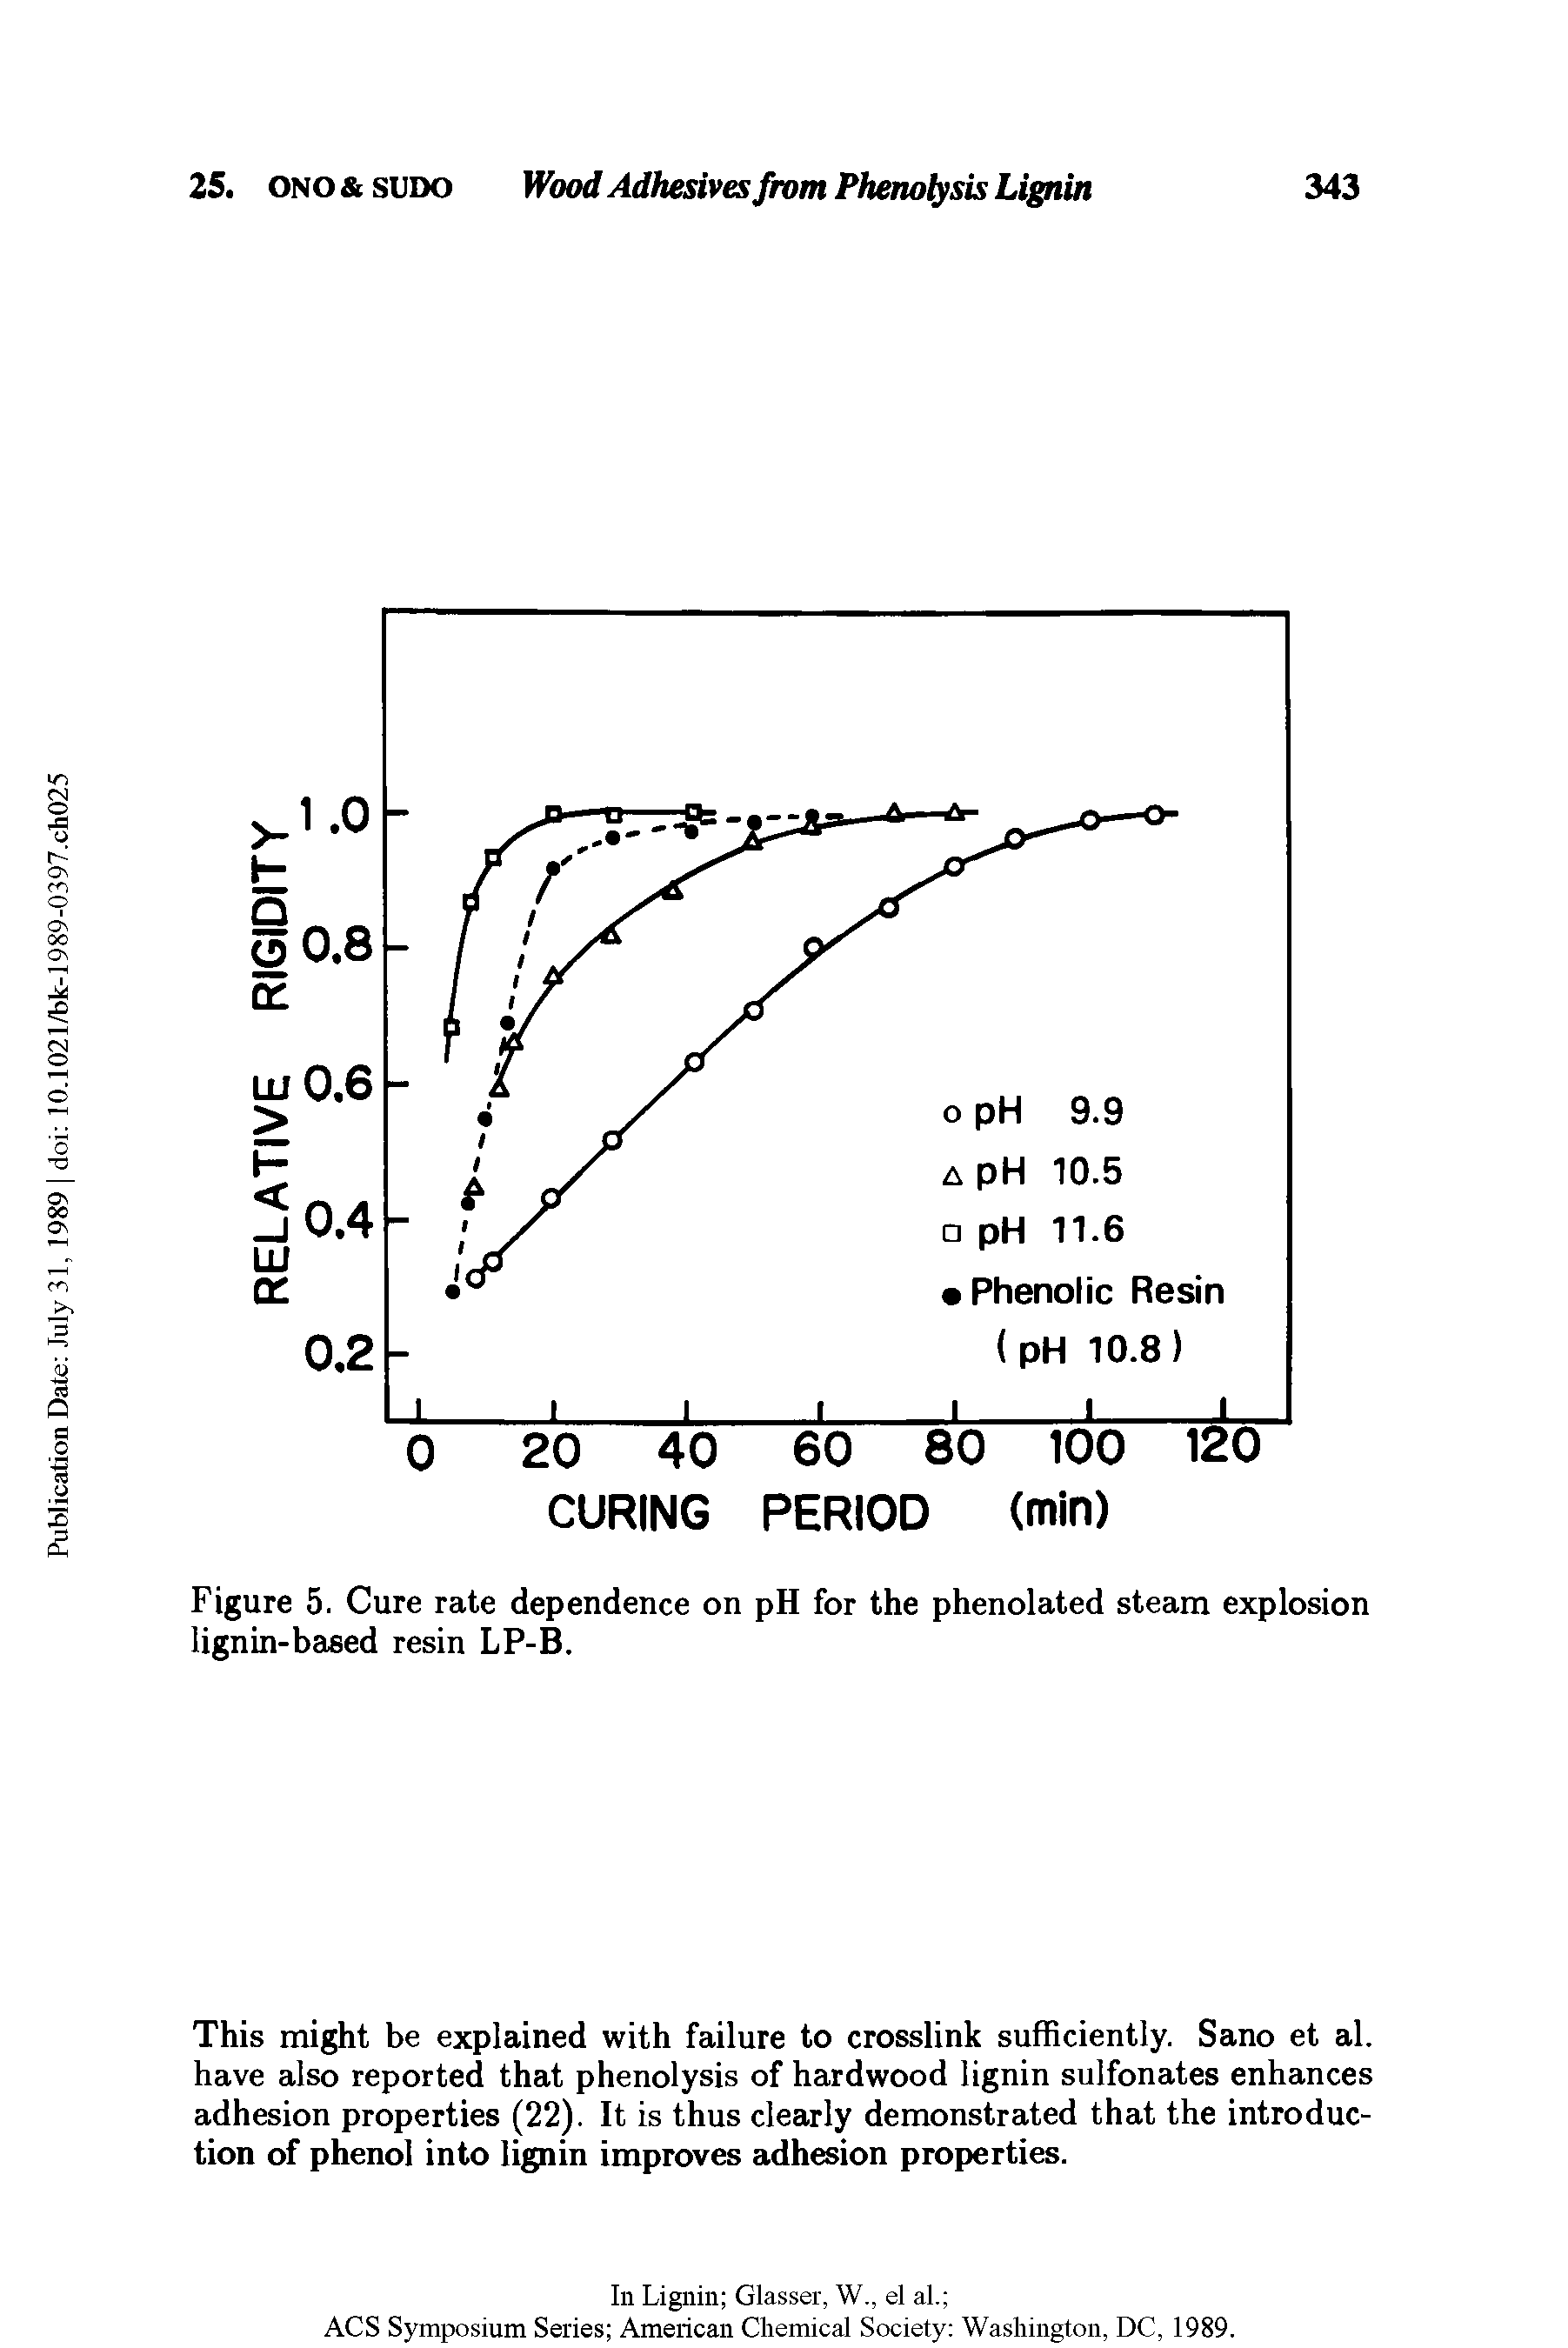 Figure 5. Cure rate dependence on pH for the phenolated steam explosion lignin-based resin LP-B.